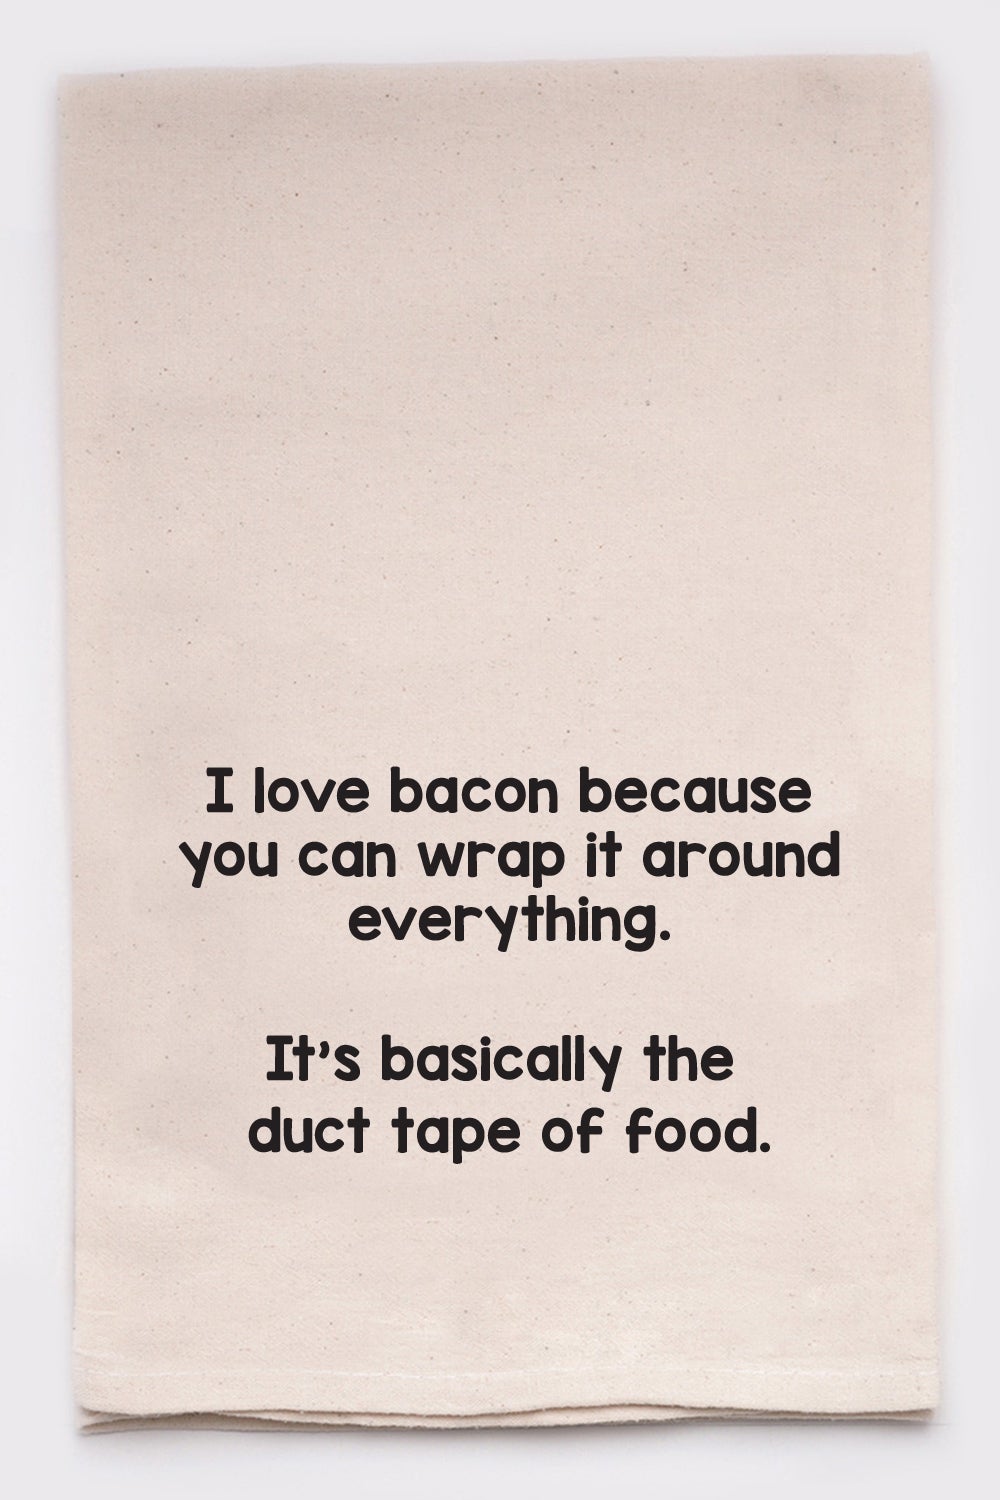 unbleached bacon is the duct tape towel on a white background